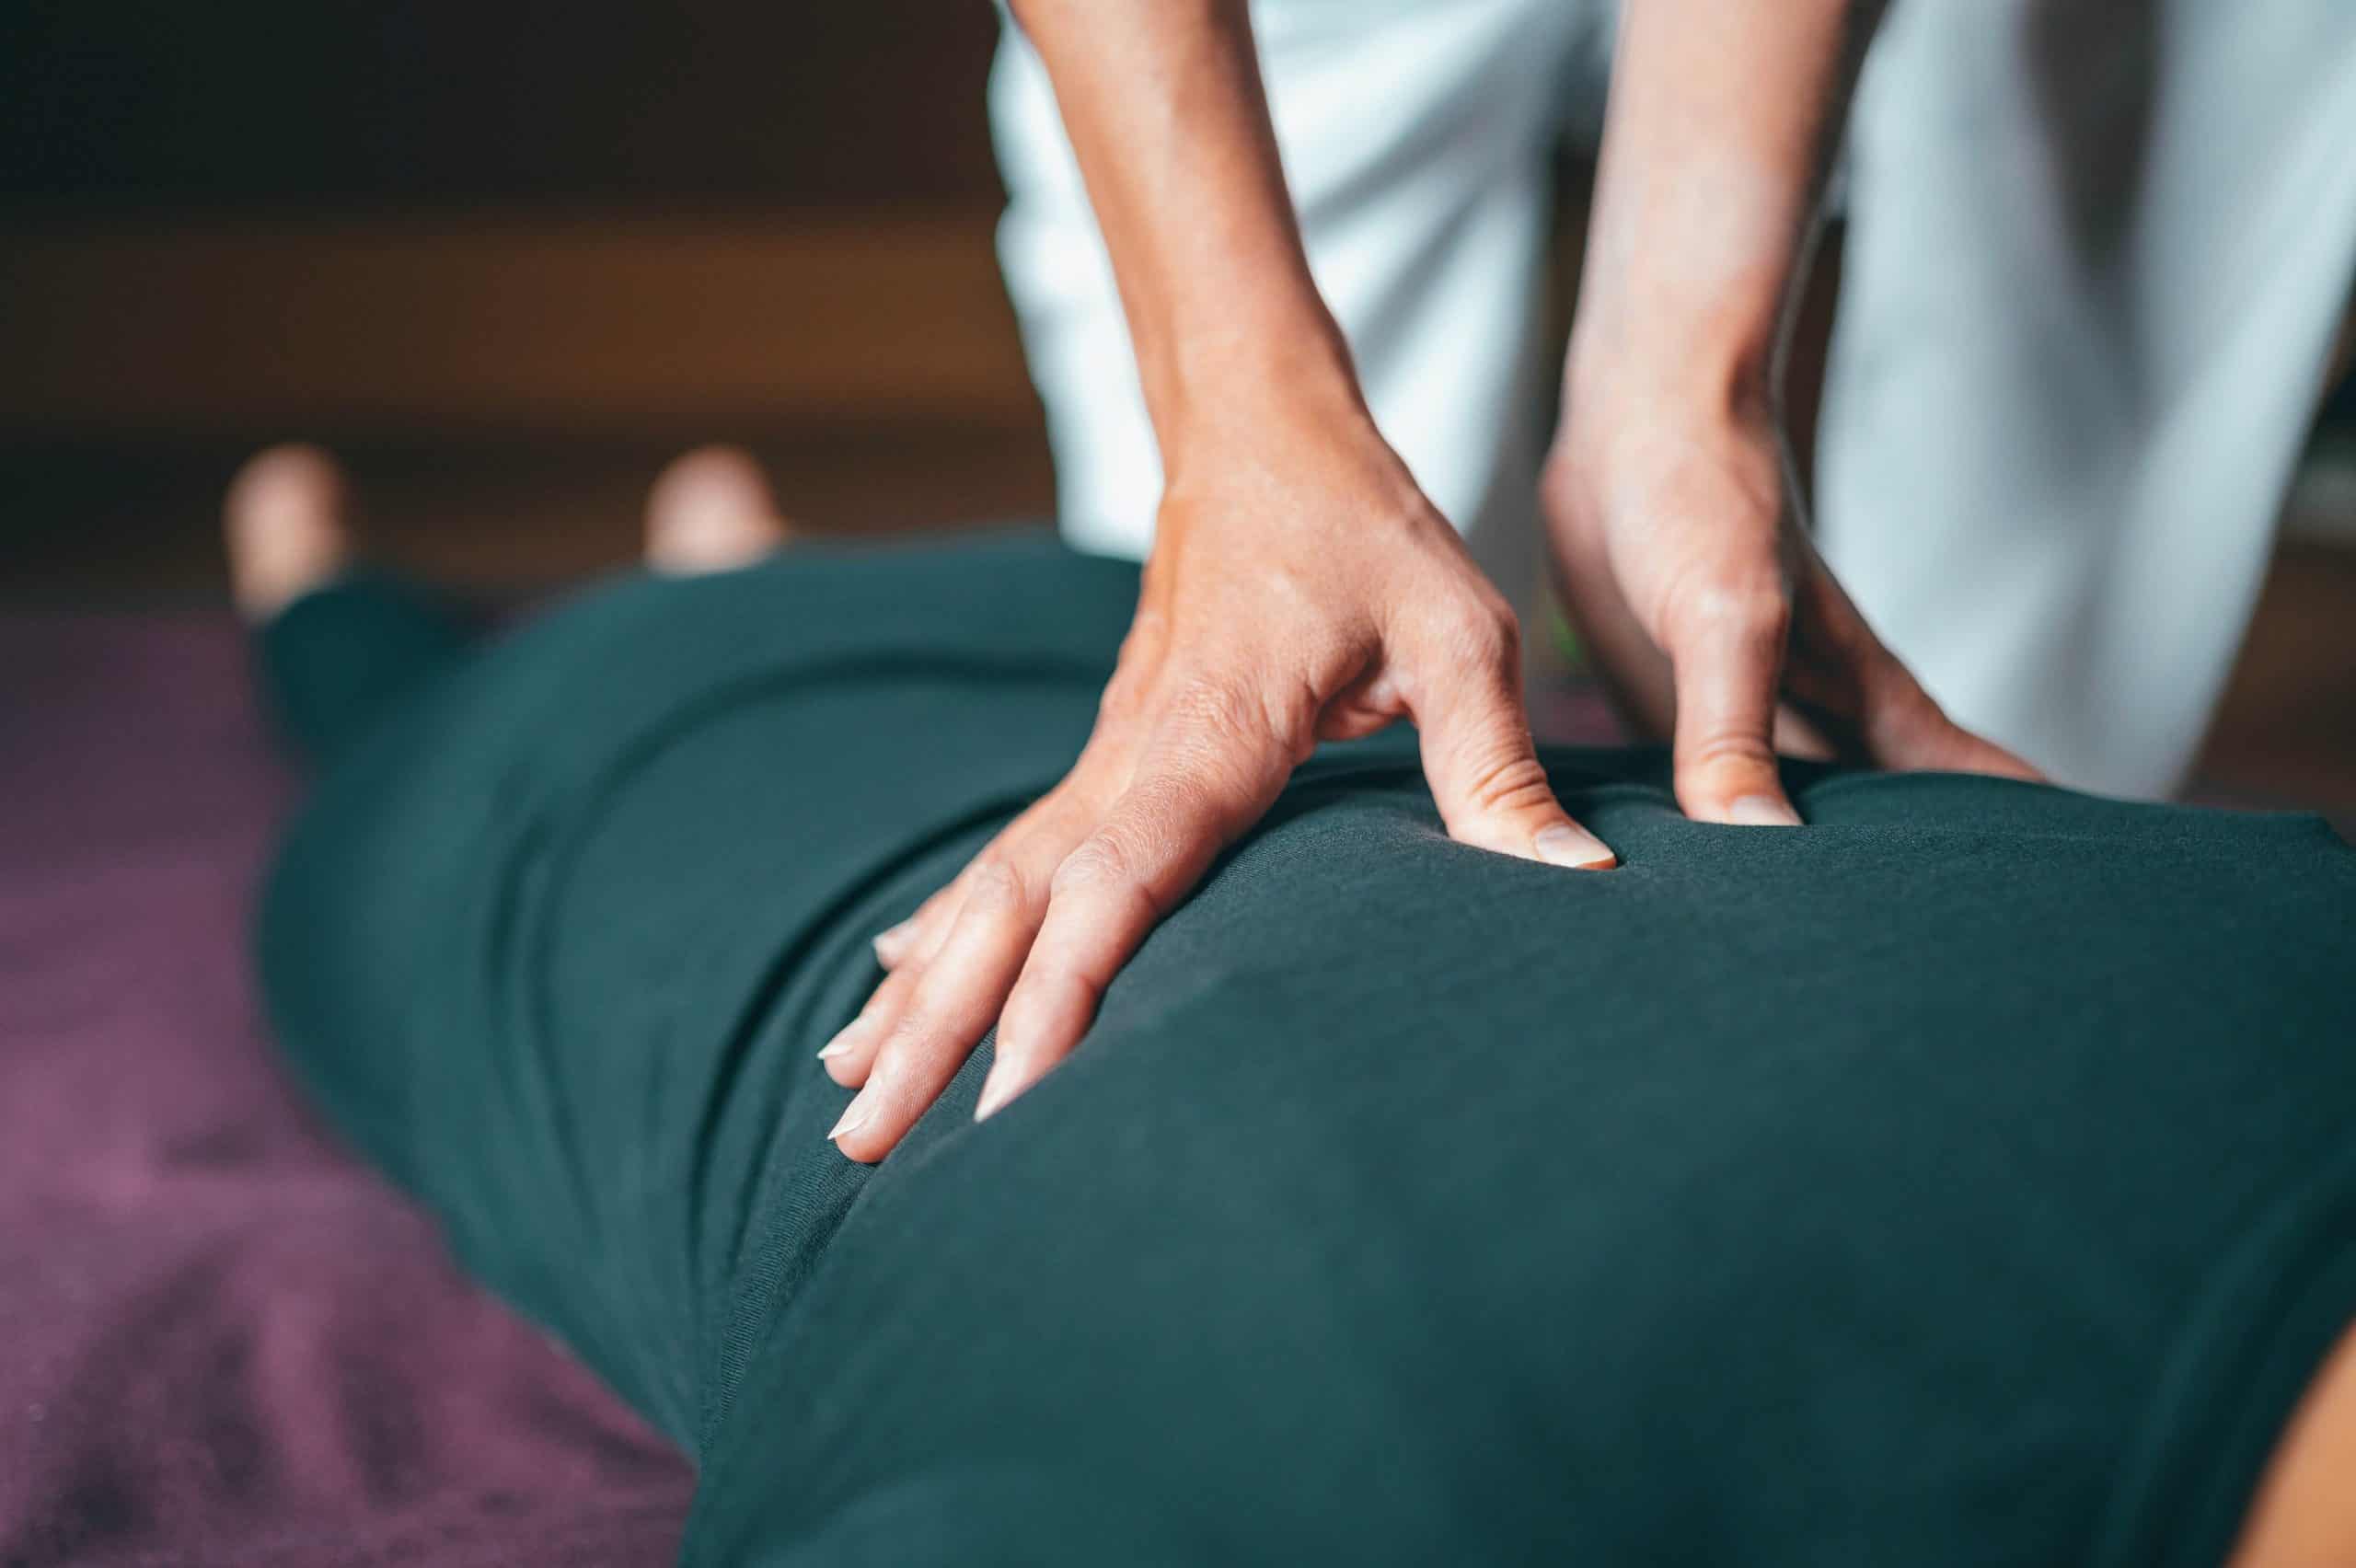 What Is Reiki Used For?